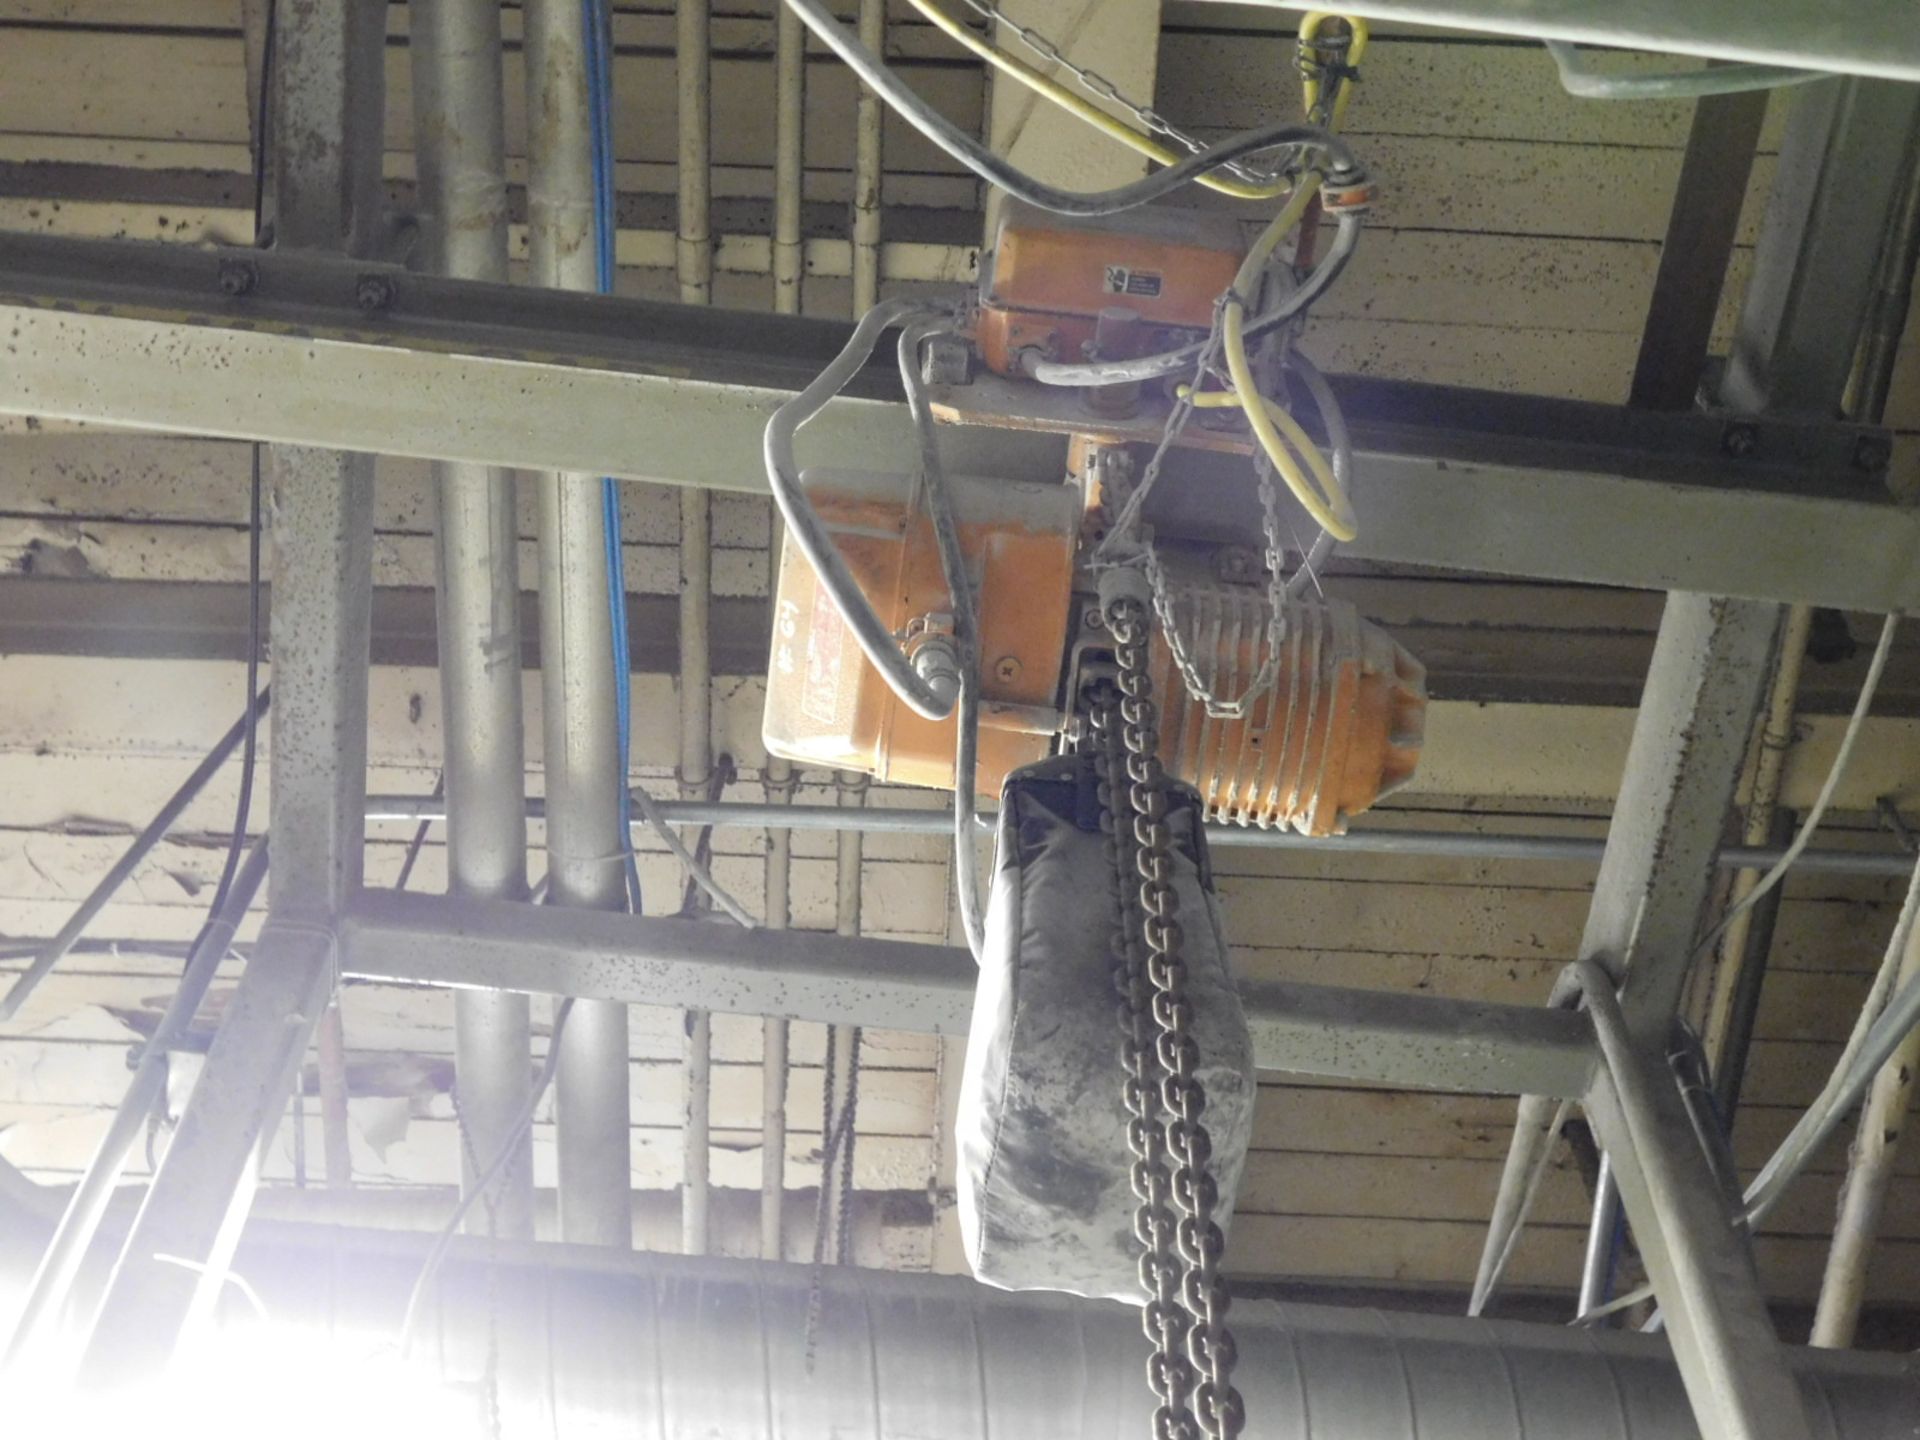 LOT/ VACUUM SYSTEM BAG LIFTER AND 2-TON HARRINGTON ELECTRIC CHAIN HOIST WITH PENDANT CONTROL [ - Image 3 of 5